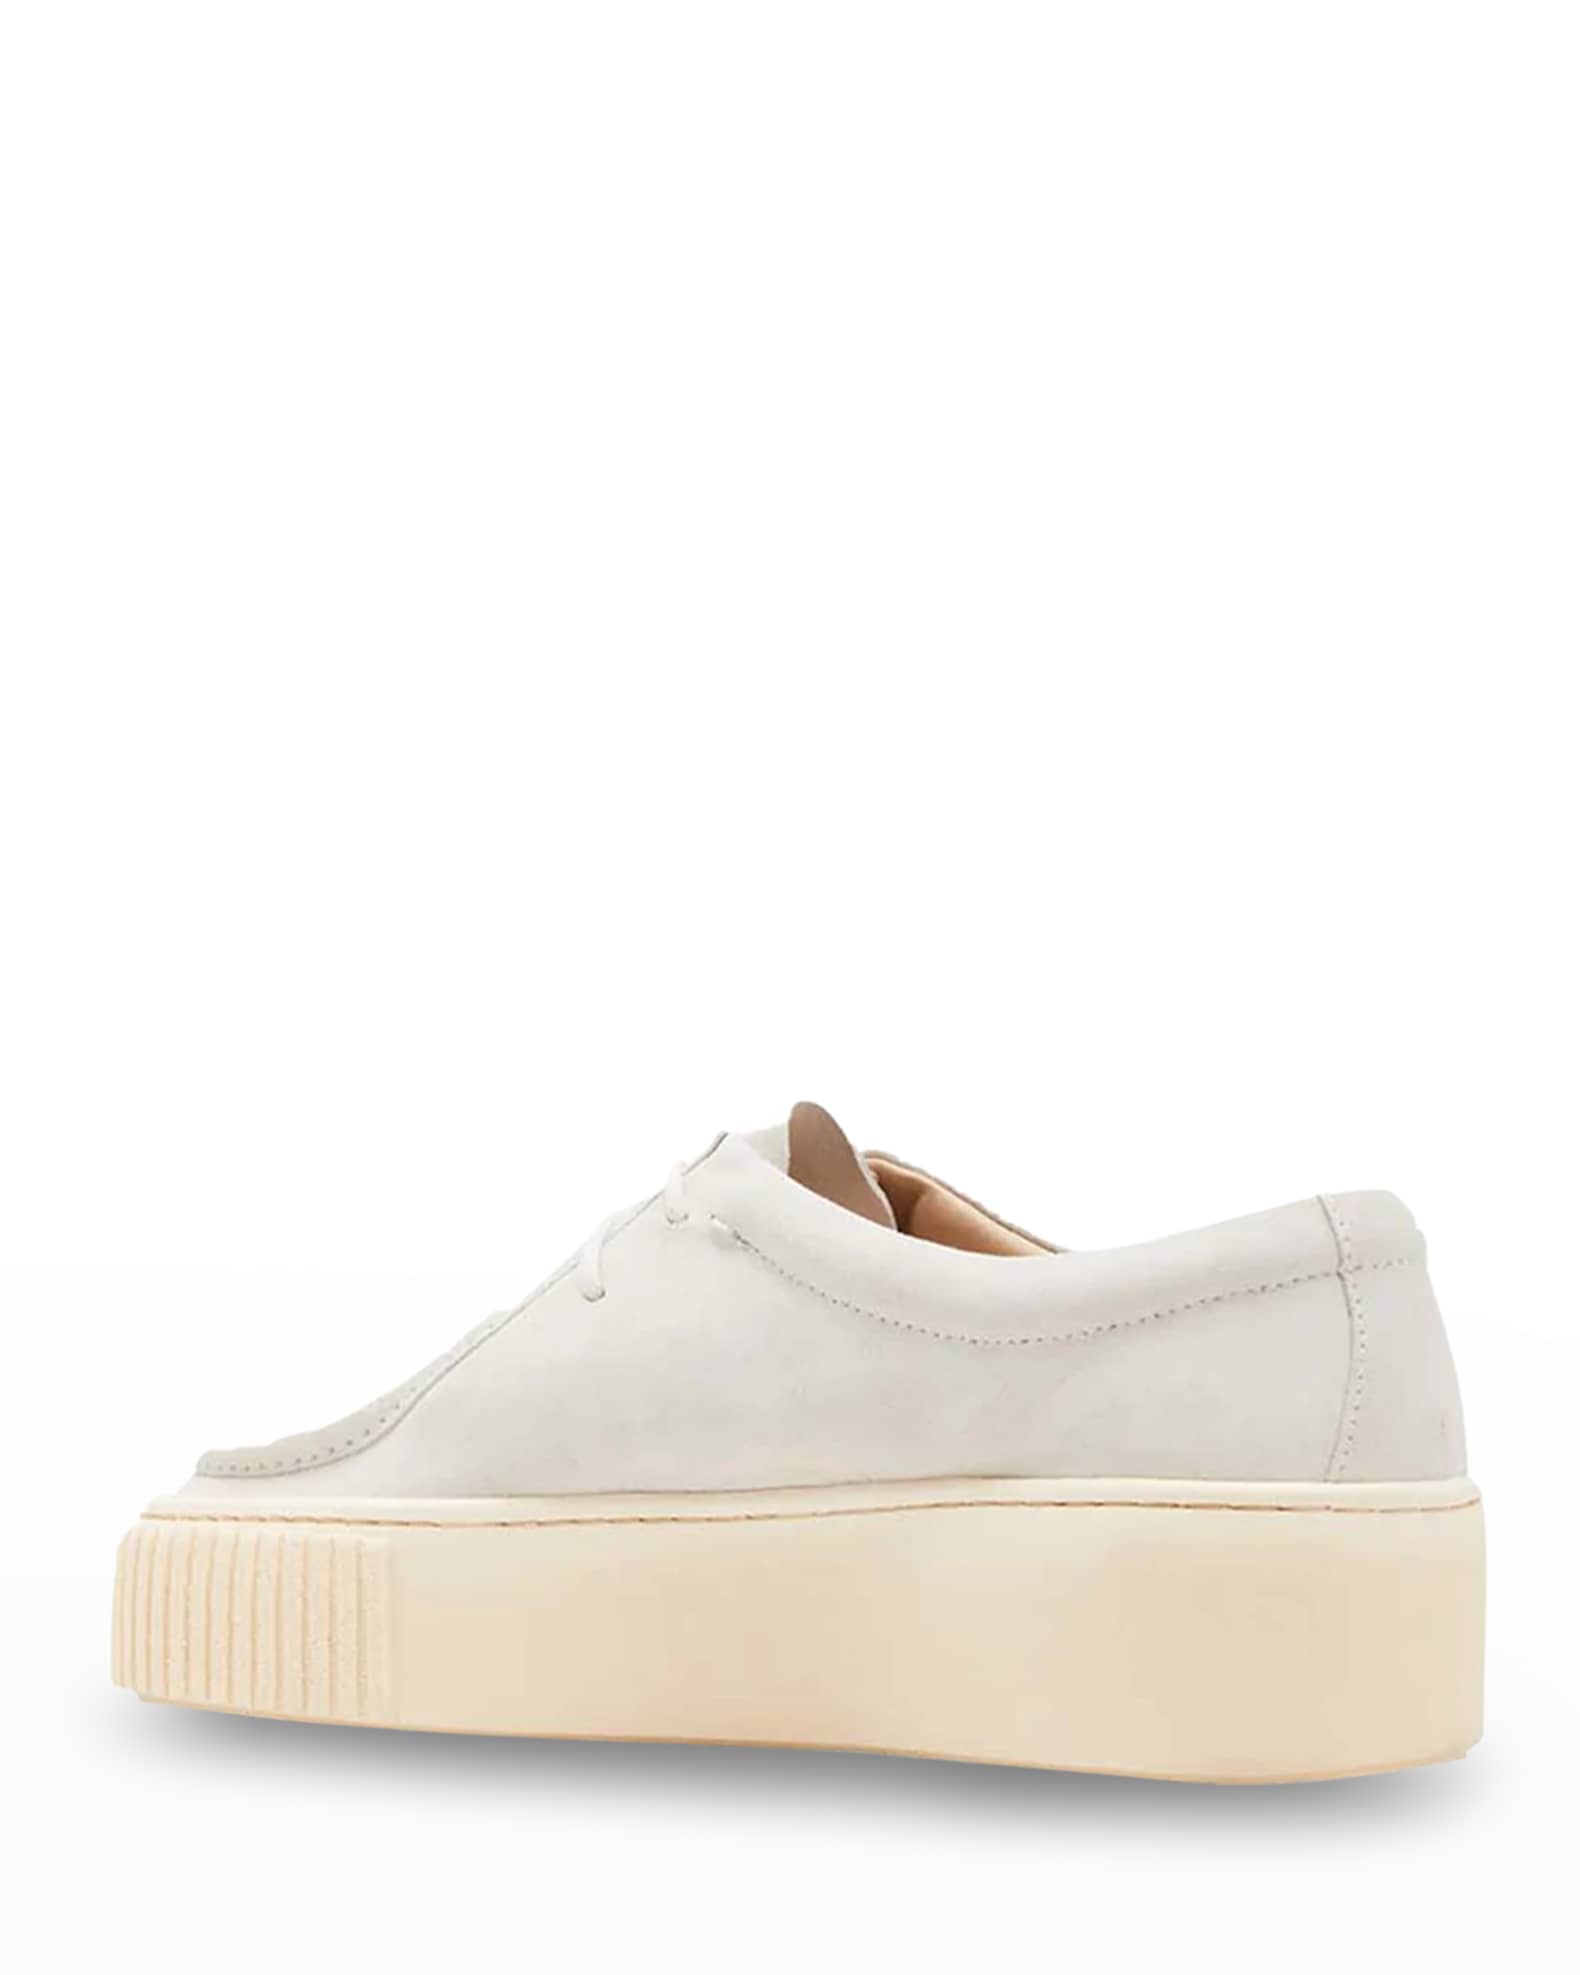 Gabriela Hearst Fontaina Suede Lace-Up Sneakers | Neiman Marcus